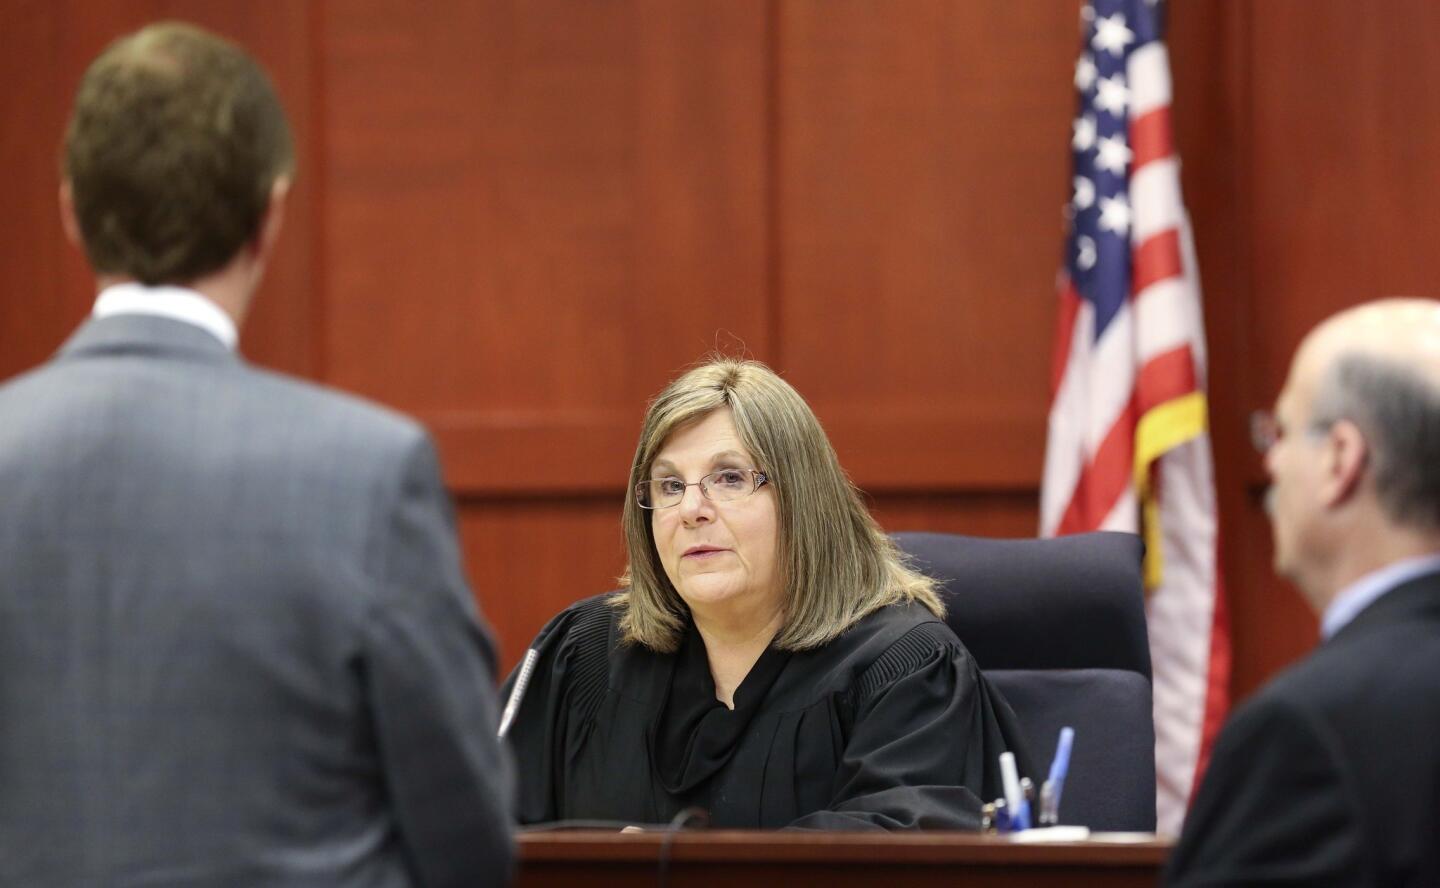 Florida Circuit Judge Debra S. Nelson rules that Zimmerman's defense team cannot delay the trial further. Zimmerman is set to stand trial in June for second-degree murder.More: Judge declines stay; case to proceed in June